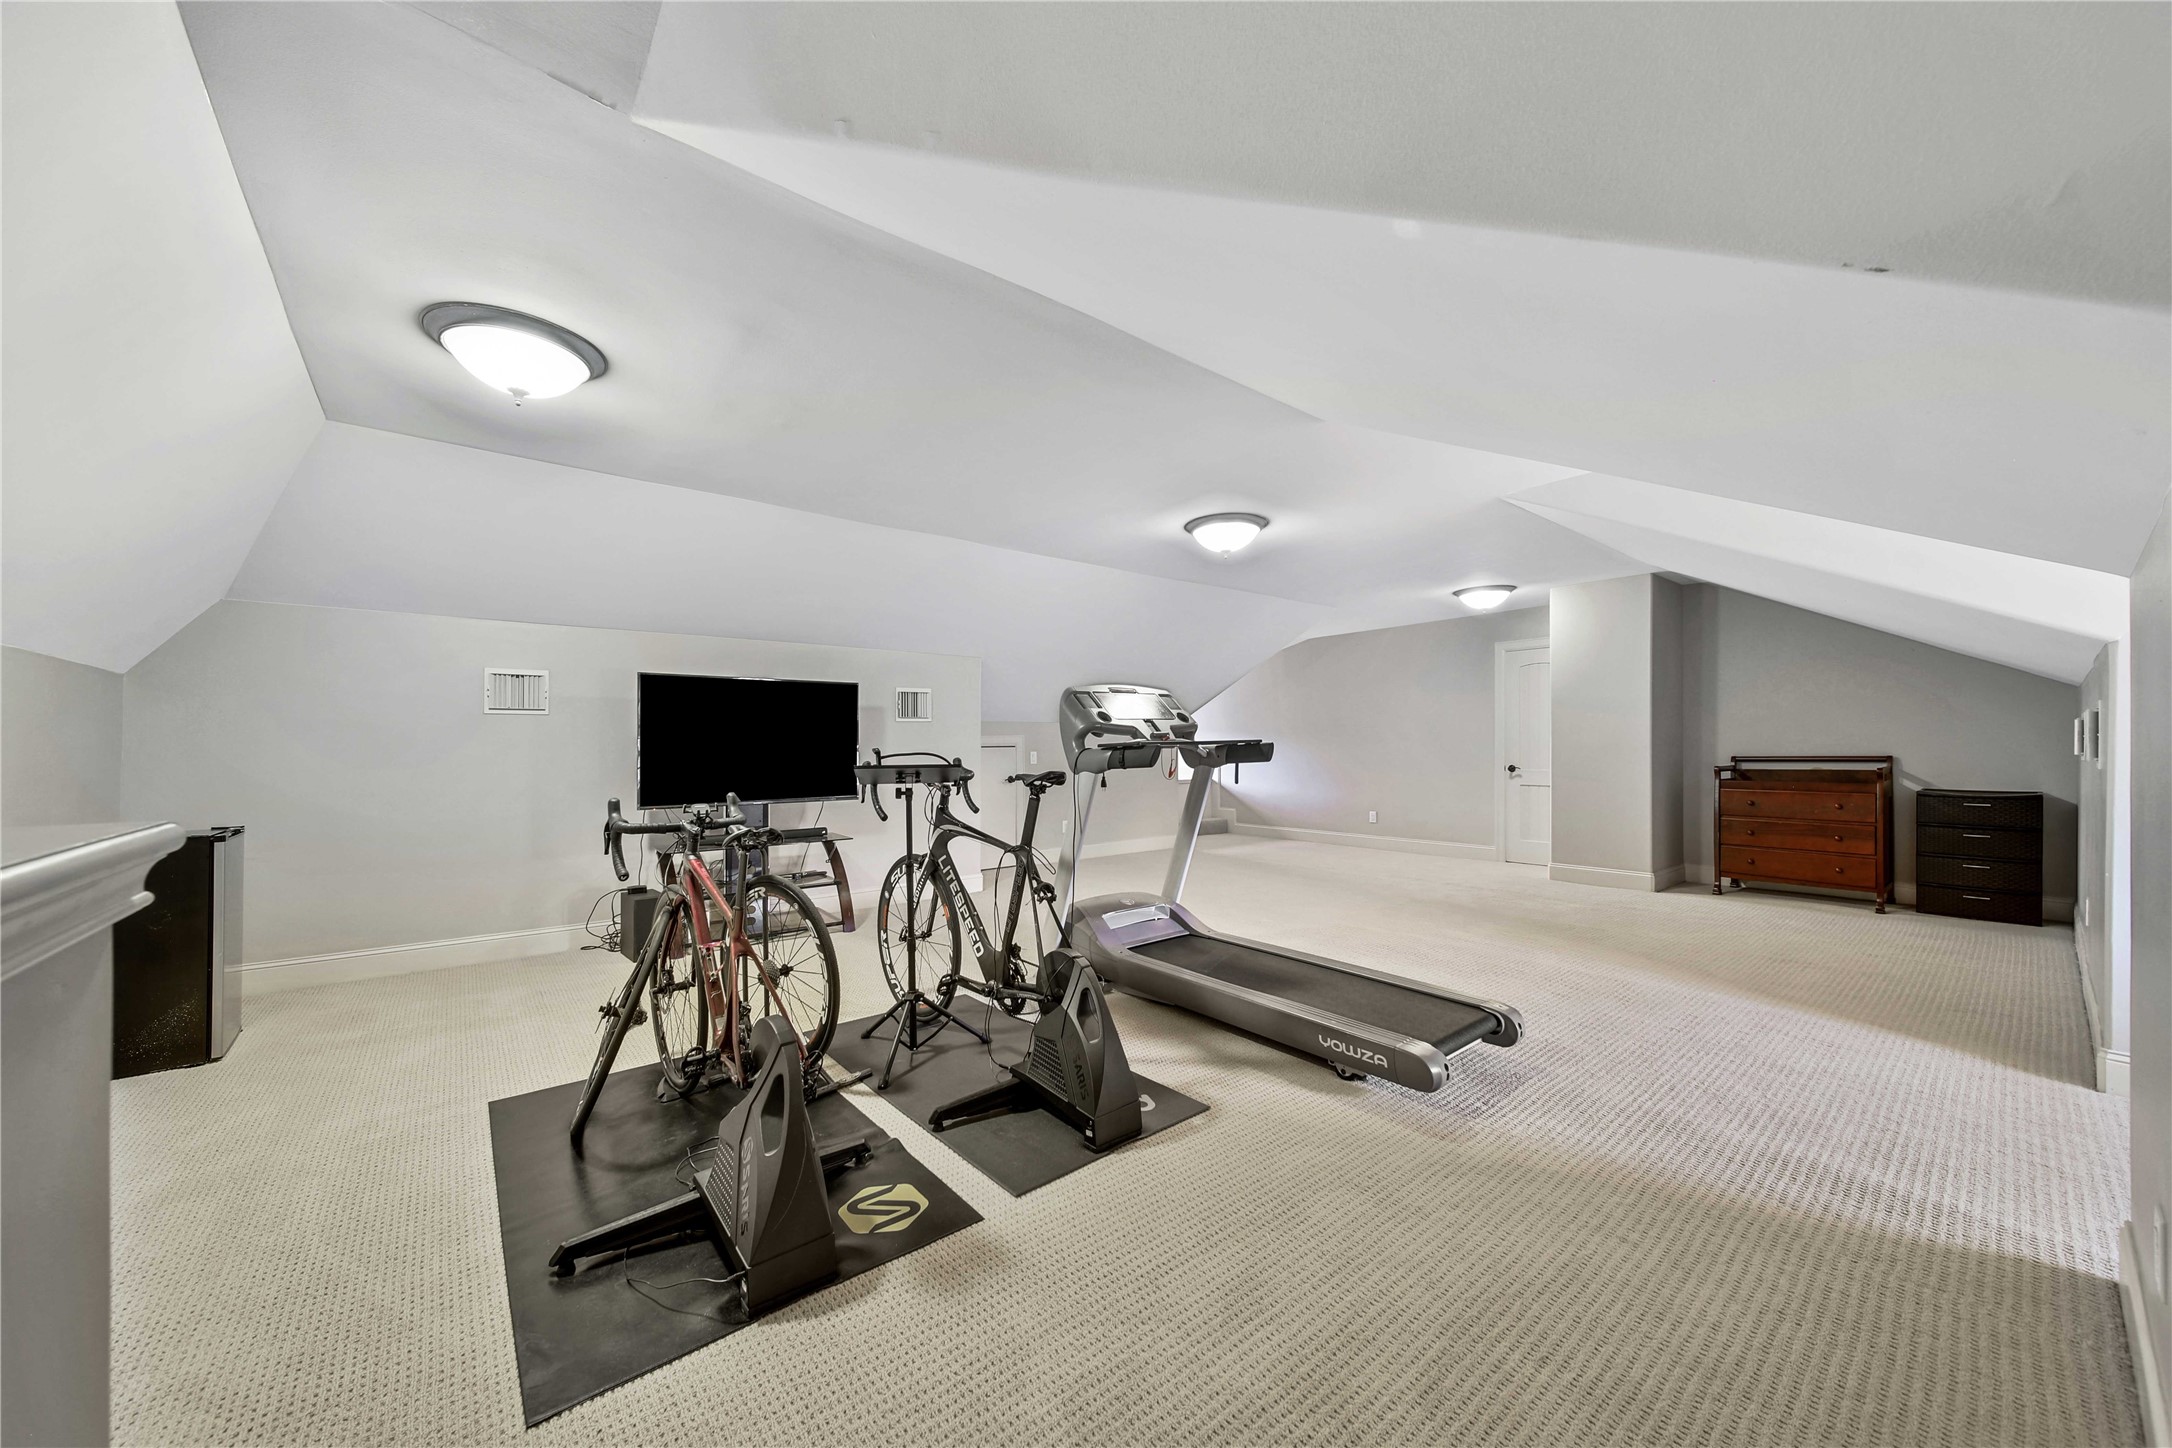 Last but not least, having a dedicated workout room offers several benefits. Firstly, it eliminates the need to travel to a gym, saving time and expenses associated with memberships or commuting. It also provides privacy, allowing you to exercise without distractions or feeling self-conscious. This can be especially appealing for individuals who prefer a more private and personalized exercise experience. This 3rd floor space could also be used as climate controled easy storage.
